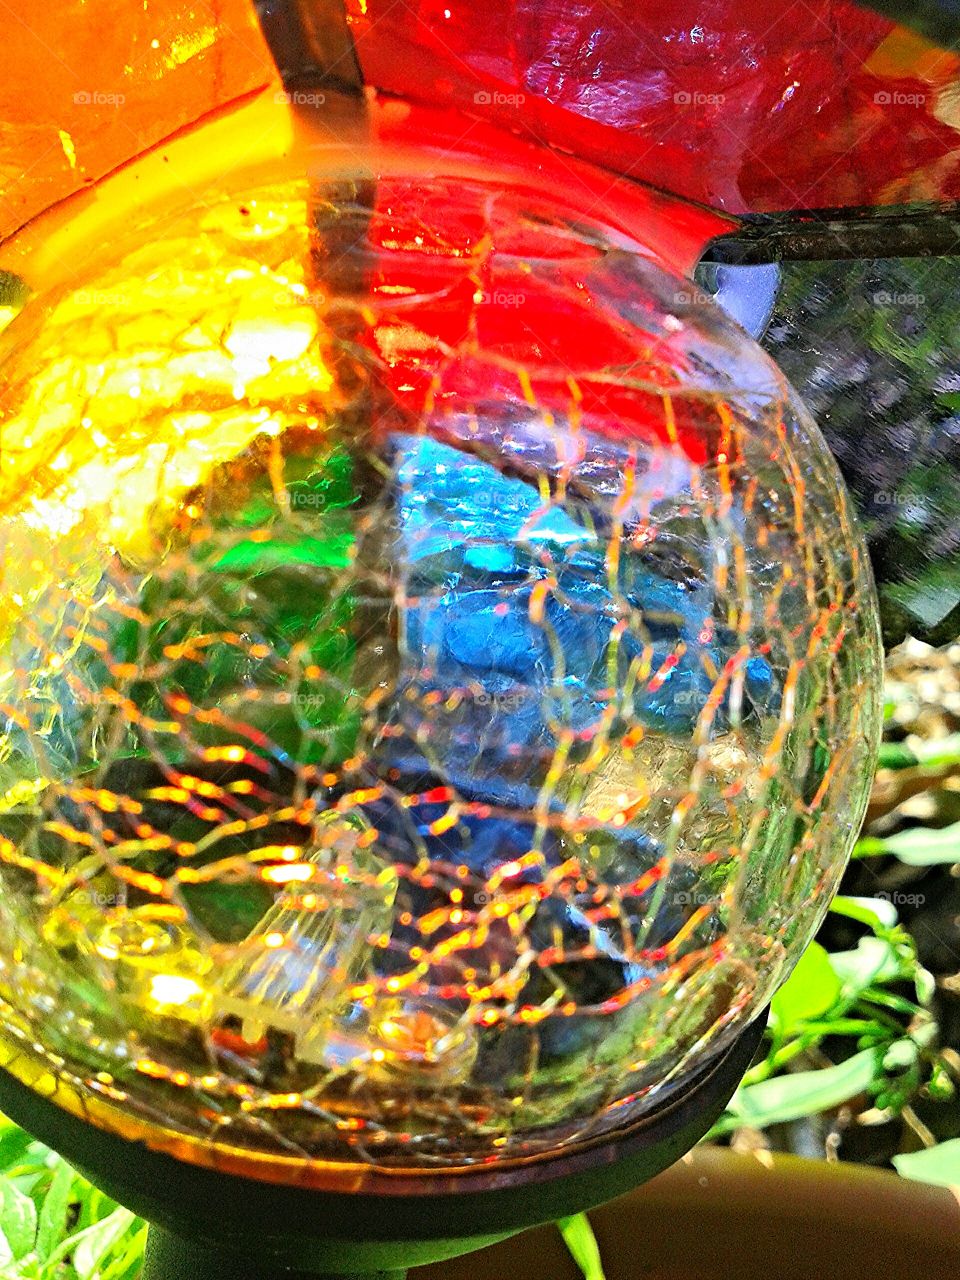 Crackled glass garden orb. A special feature in my friend's garden.